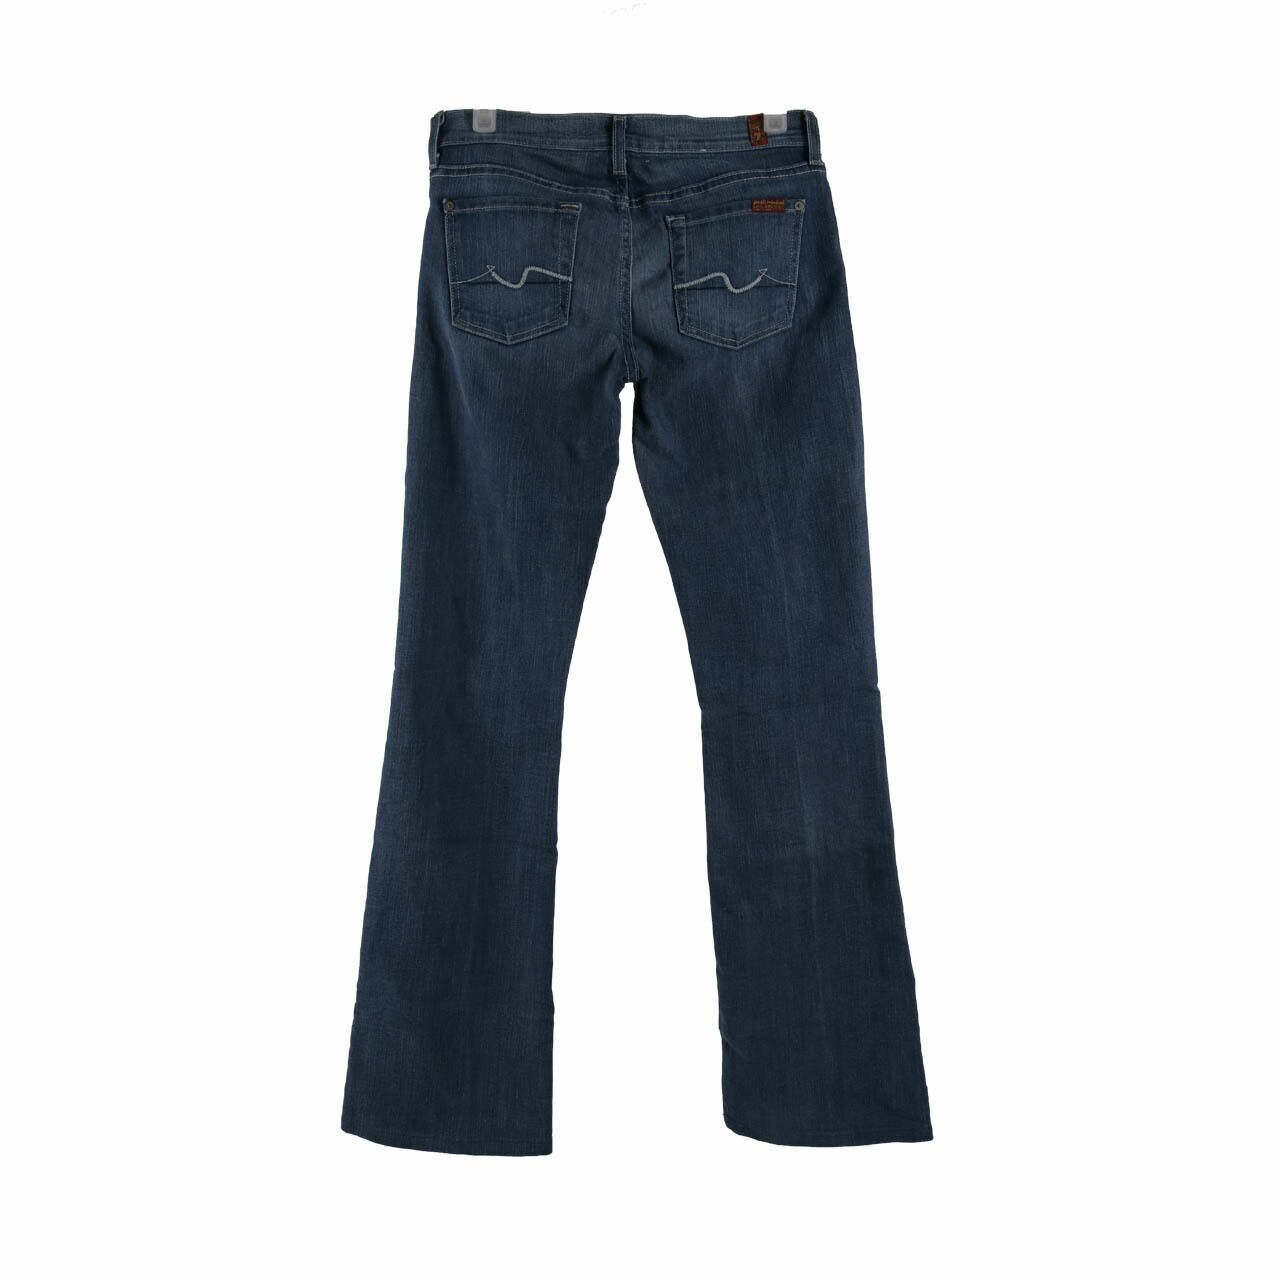 7 For All Mankind Dark Blue Jeans Long Pants